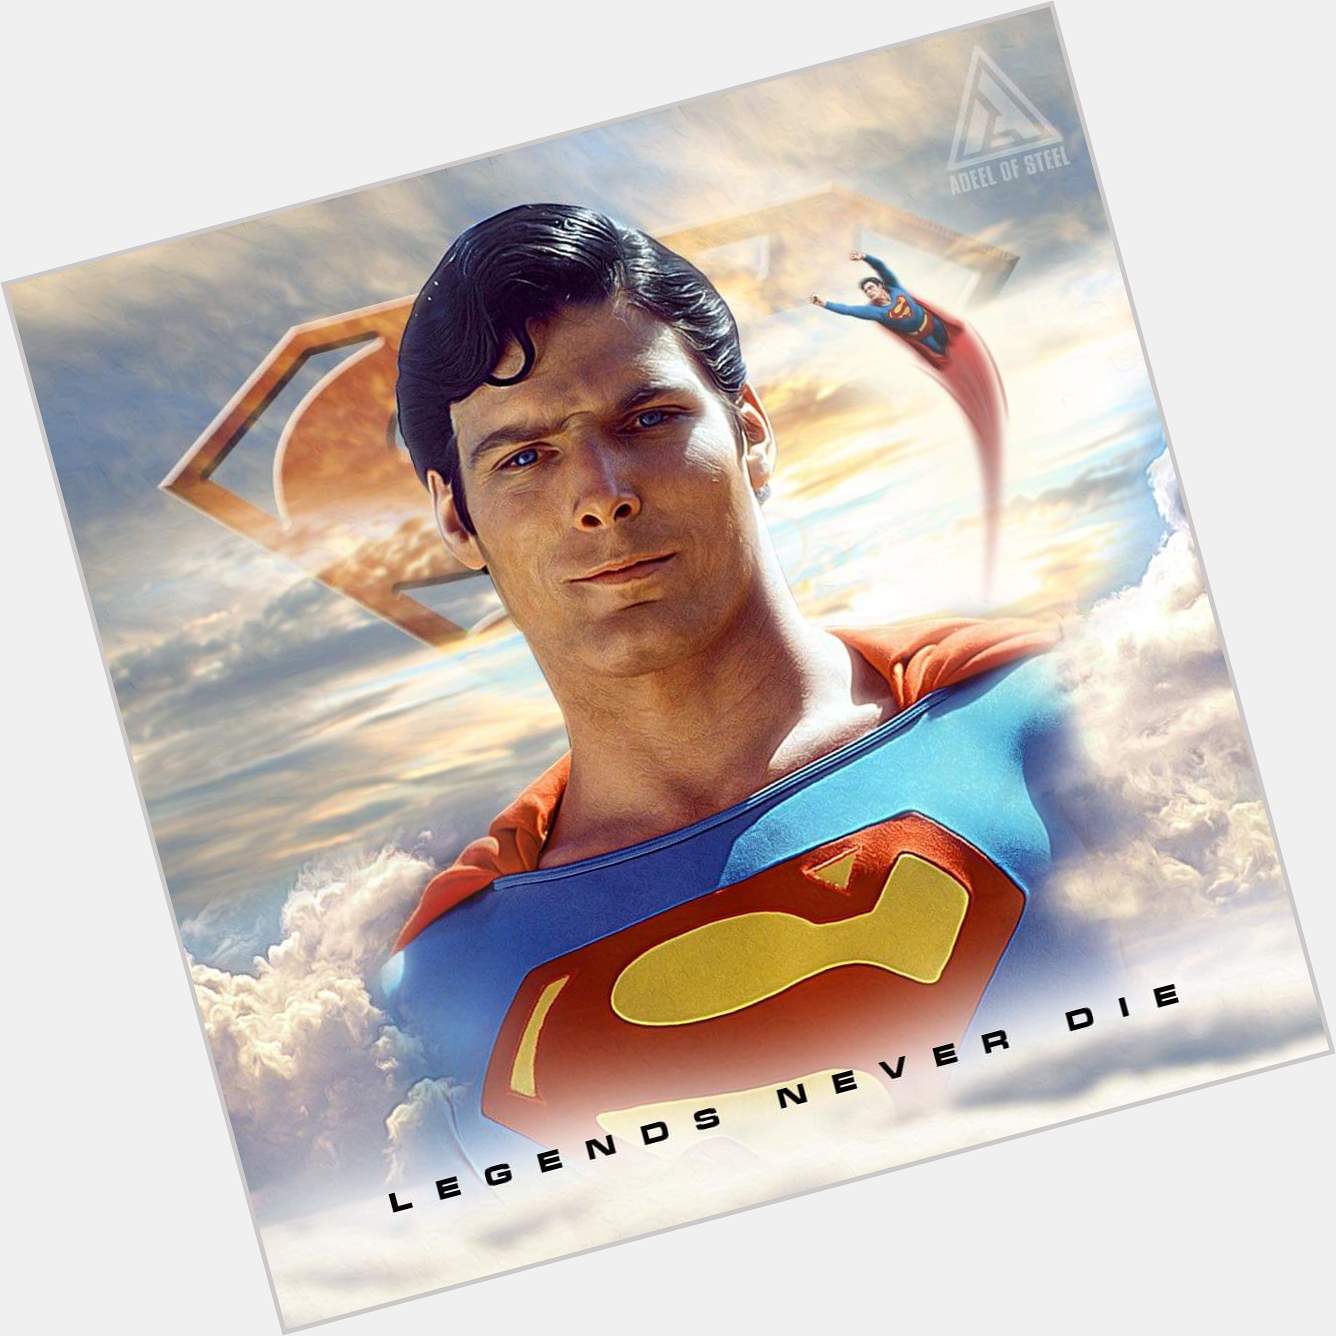 Happy Birthday Christopher Reeve. Gone but not forgotten. 